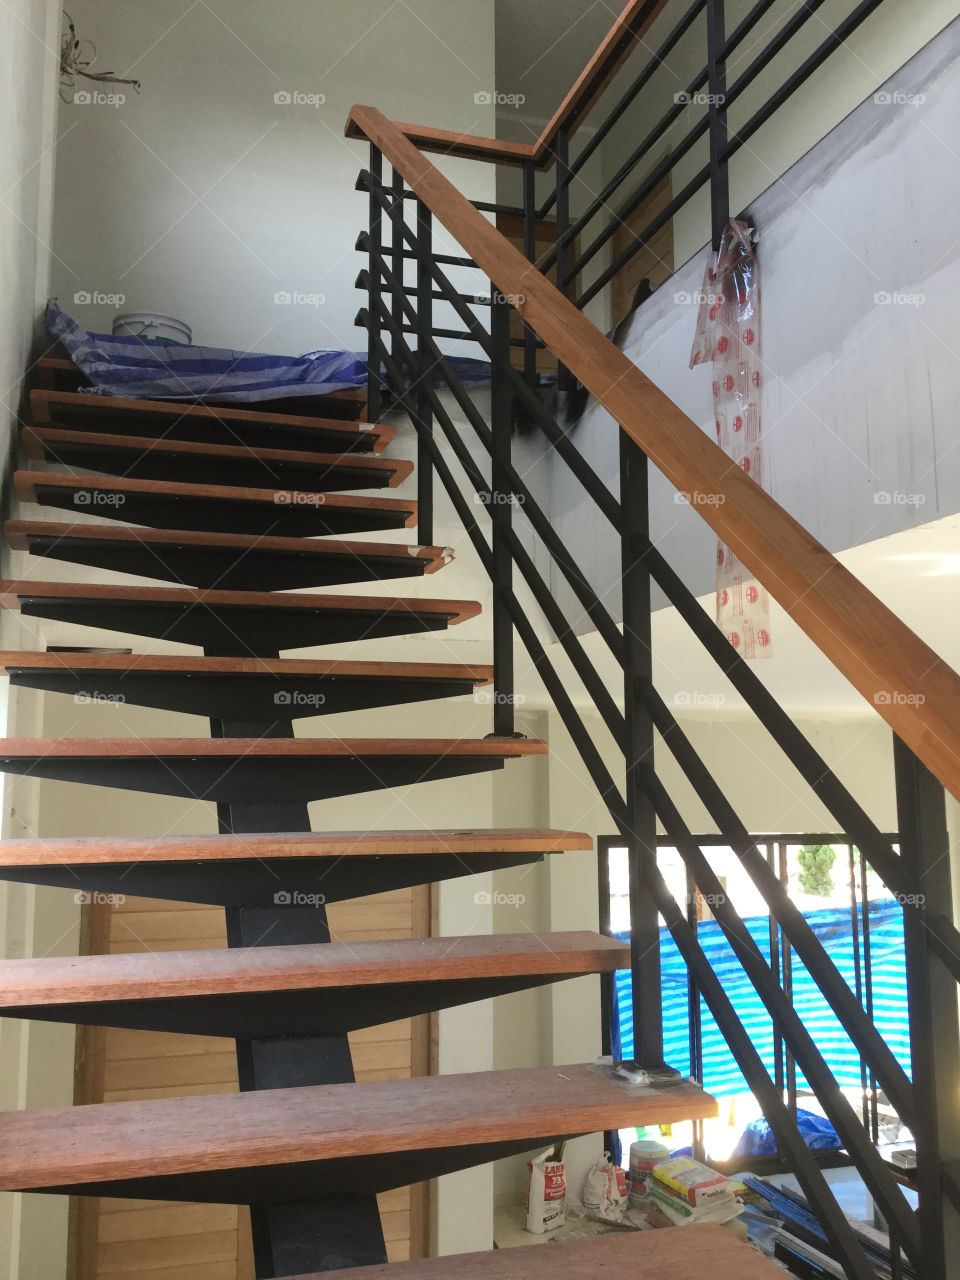 Build steel and wood stair